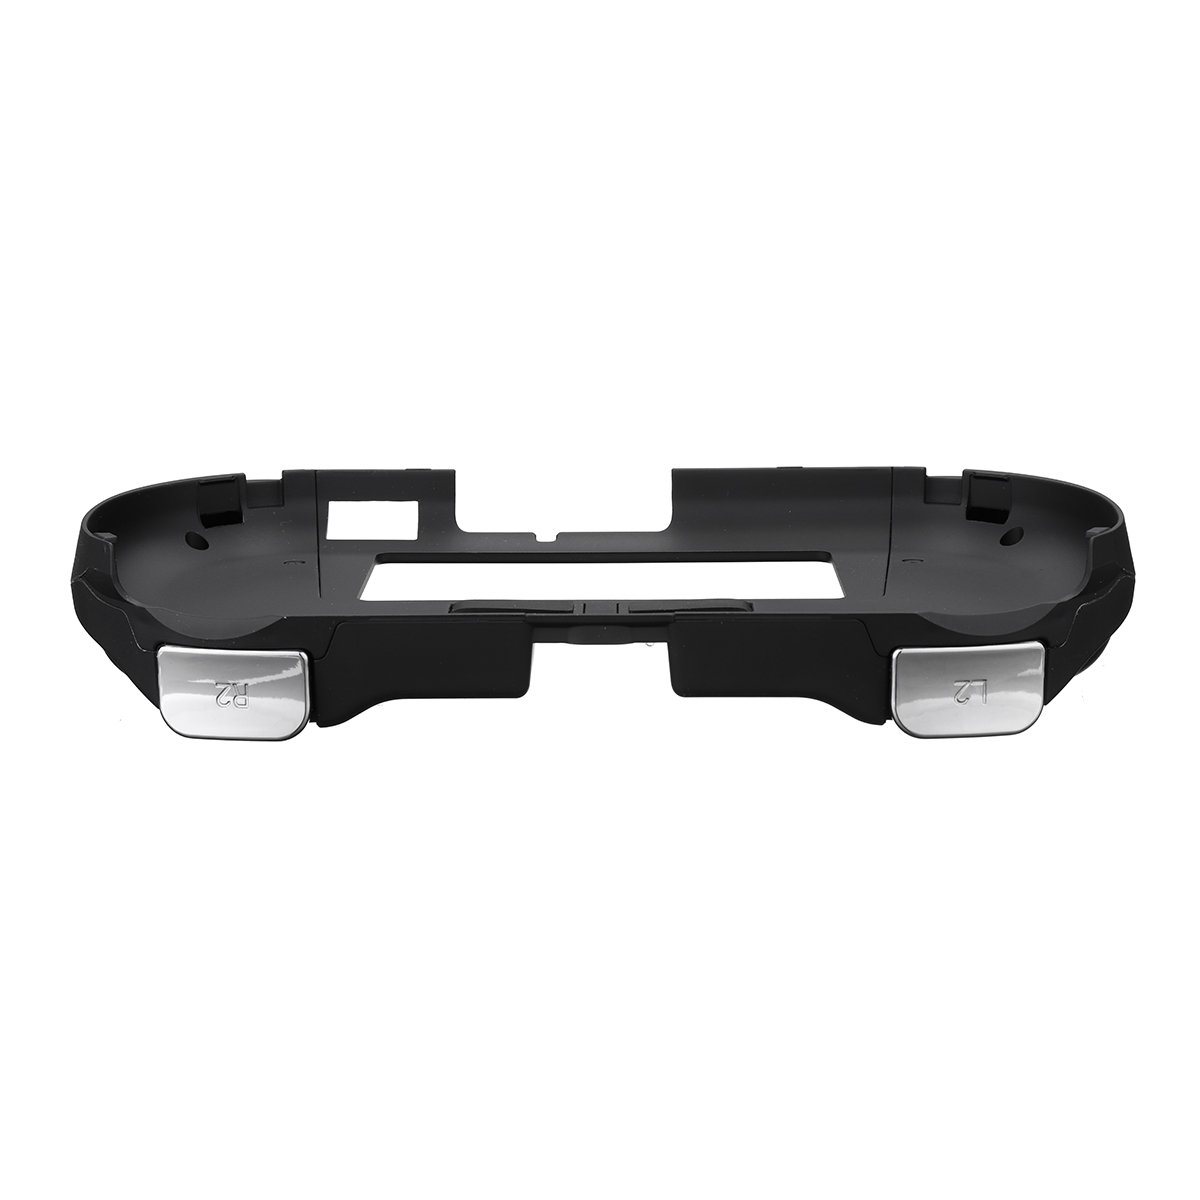 L2 R2 Trigger Grips Handle Shell Protective Case for Sony PlayStation PS Vita 2000 Game Console 22